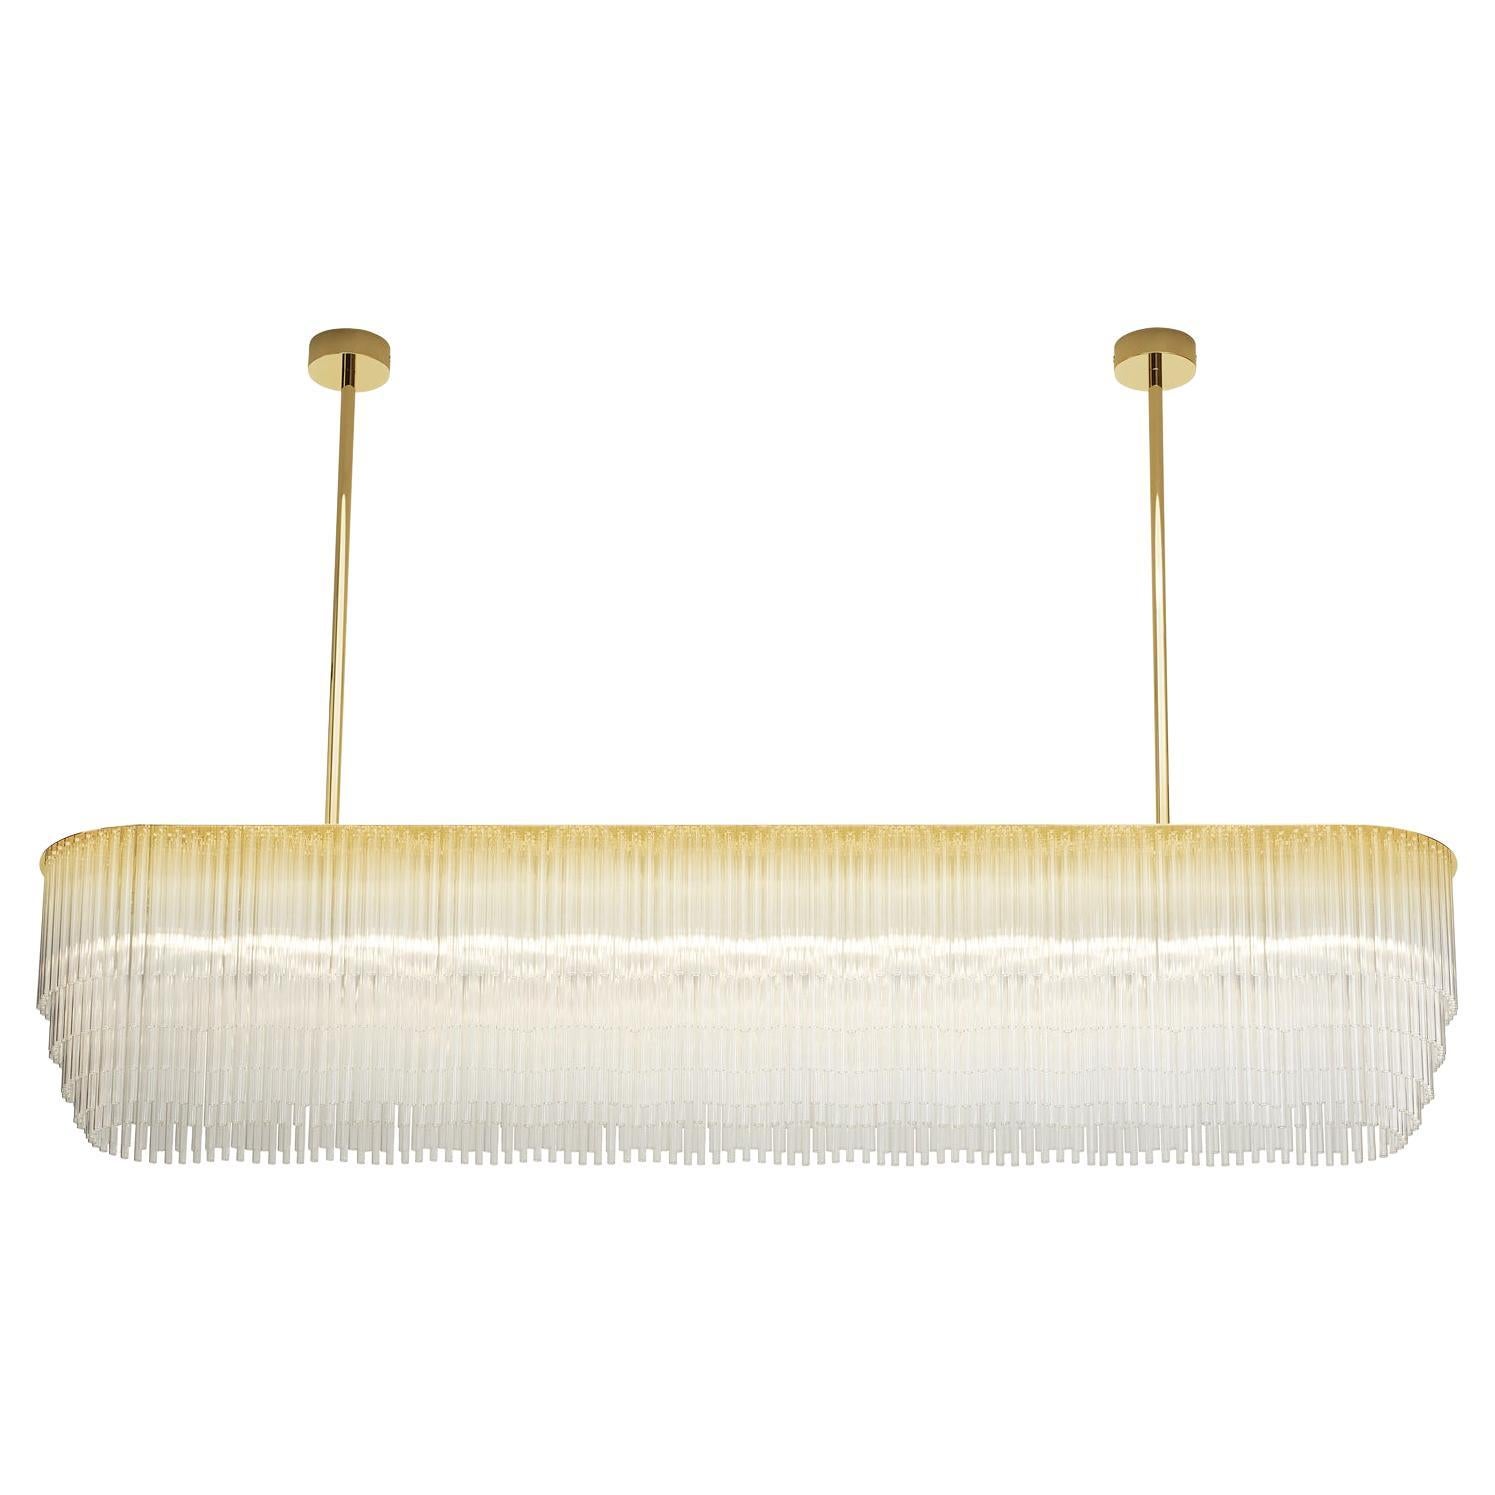 Linear Chandelier 1261mm / 25.75" in Polished Brass with Tiered Glass Profile